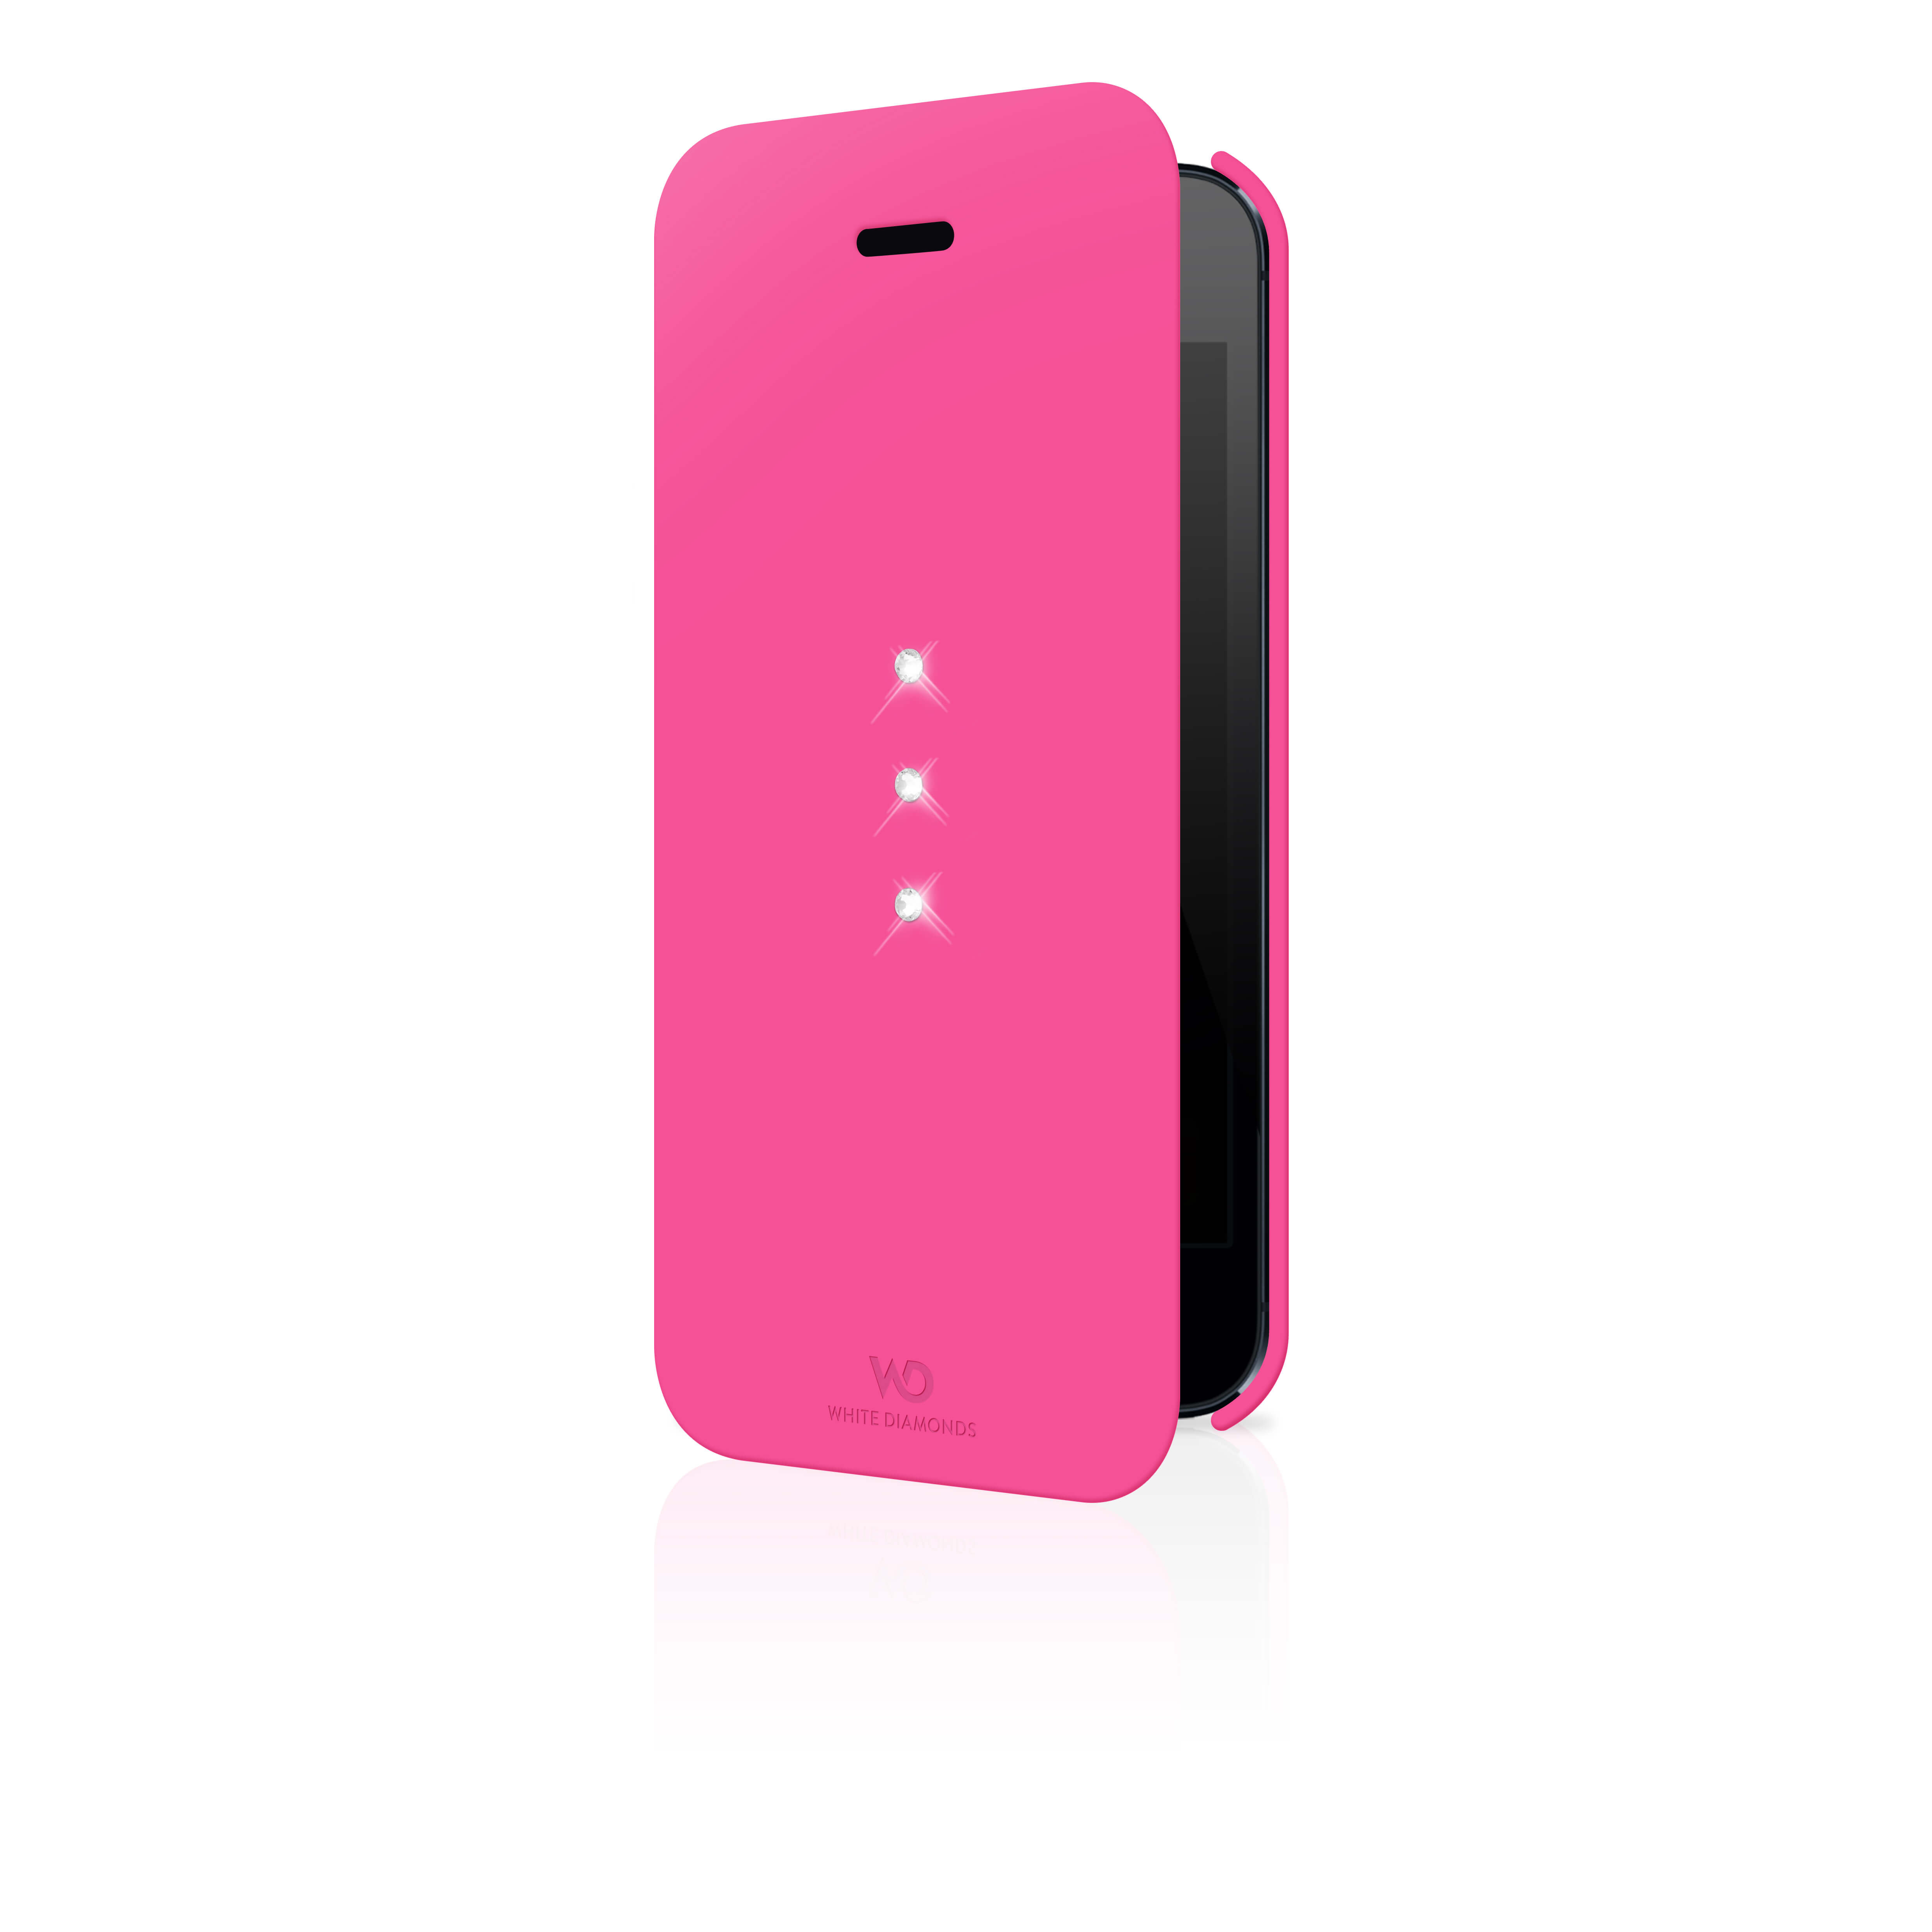 Crystal Booklet Case for Apple iPhone 5/5s/SE, pink